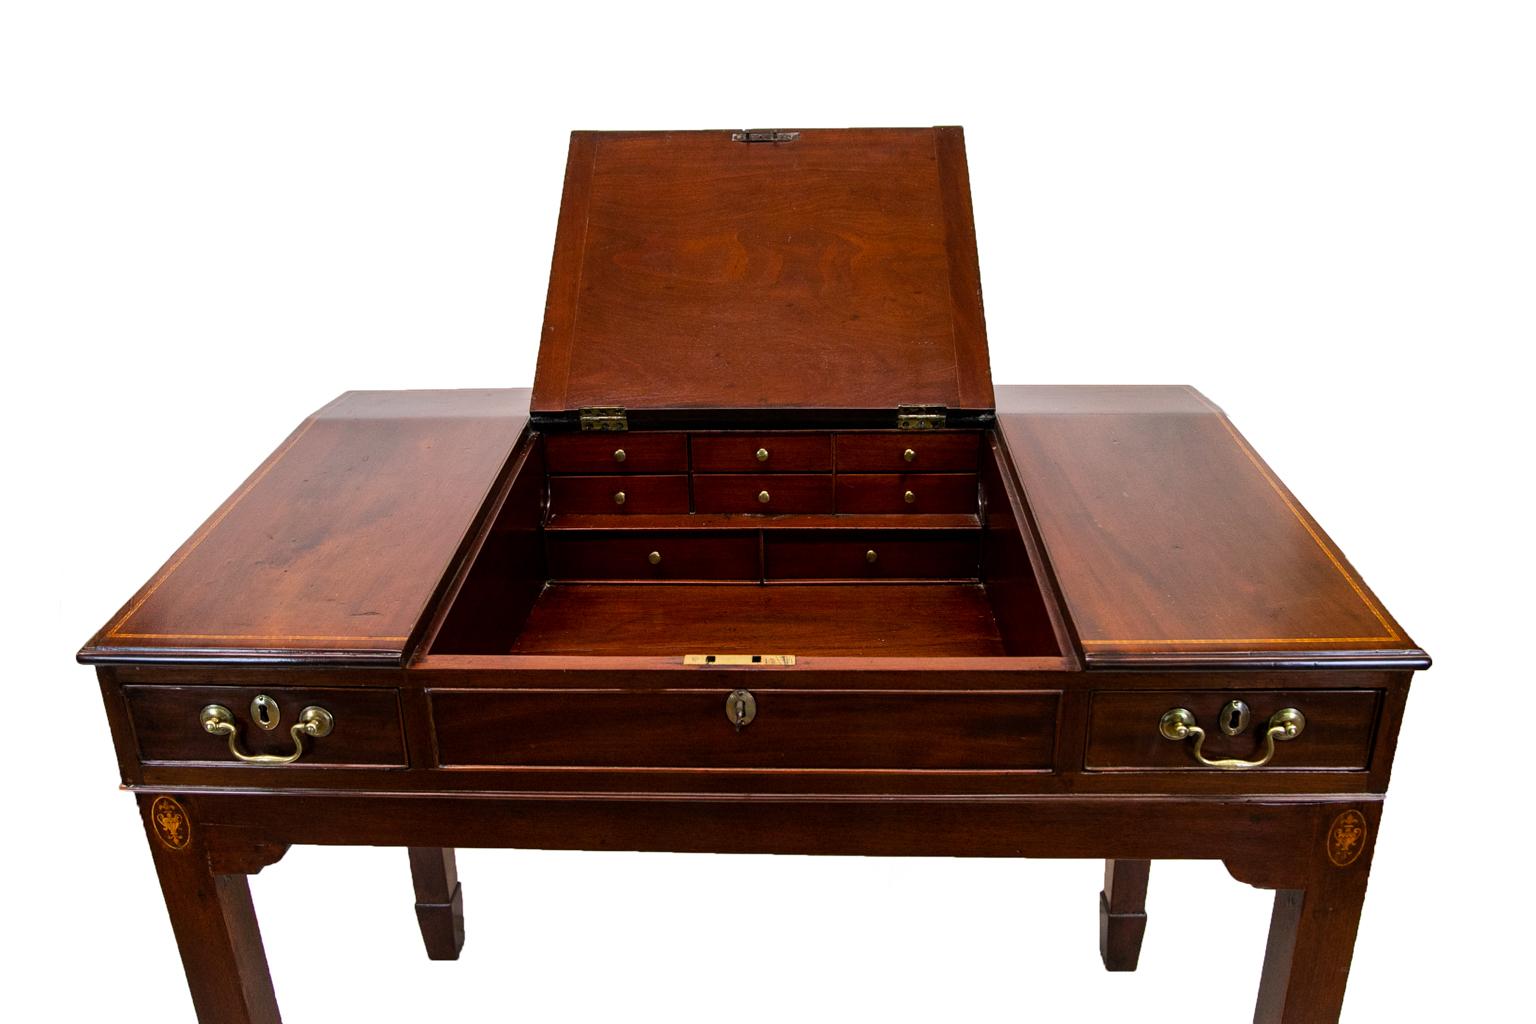 The top of this English stand up desk with lift top is inlaid with boxwood and ebony line inlay framed by bullnose molding on all four sides. The back side is finished and inlaid. The top section has exposed dovetailed construction. The center